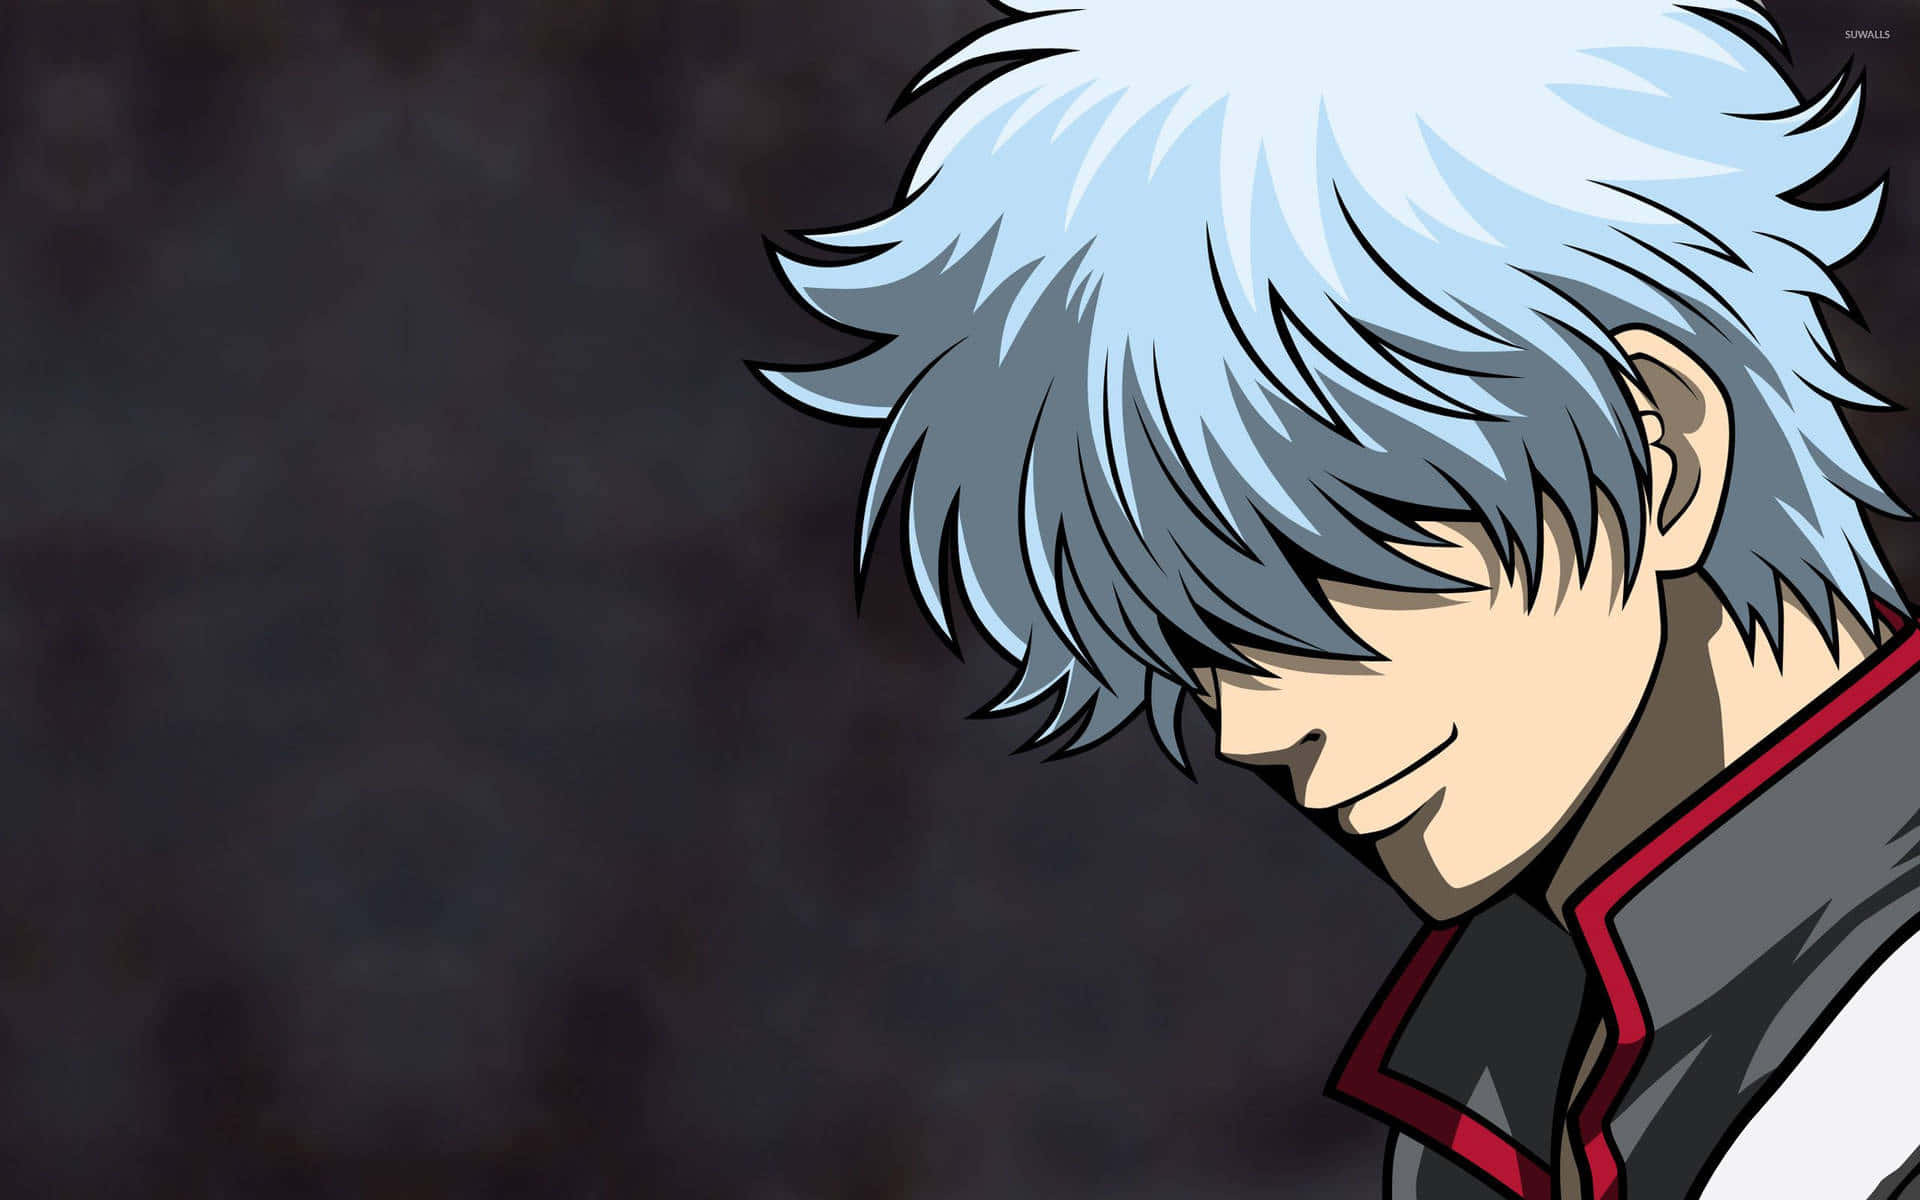 Enjoy a comic adventure in the world of Gintama HD! Wallpaper